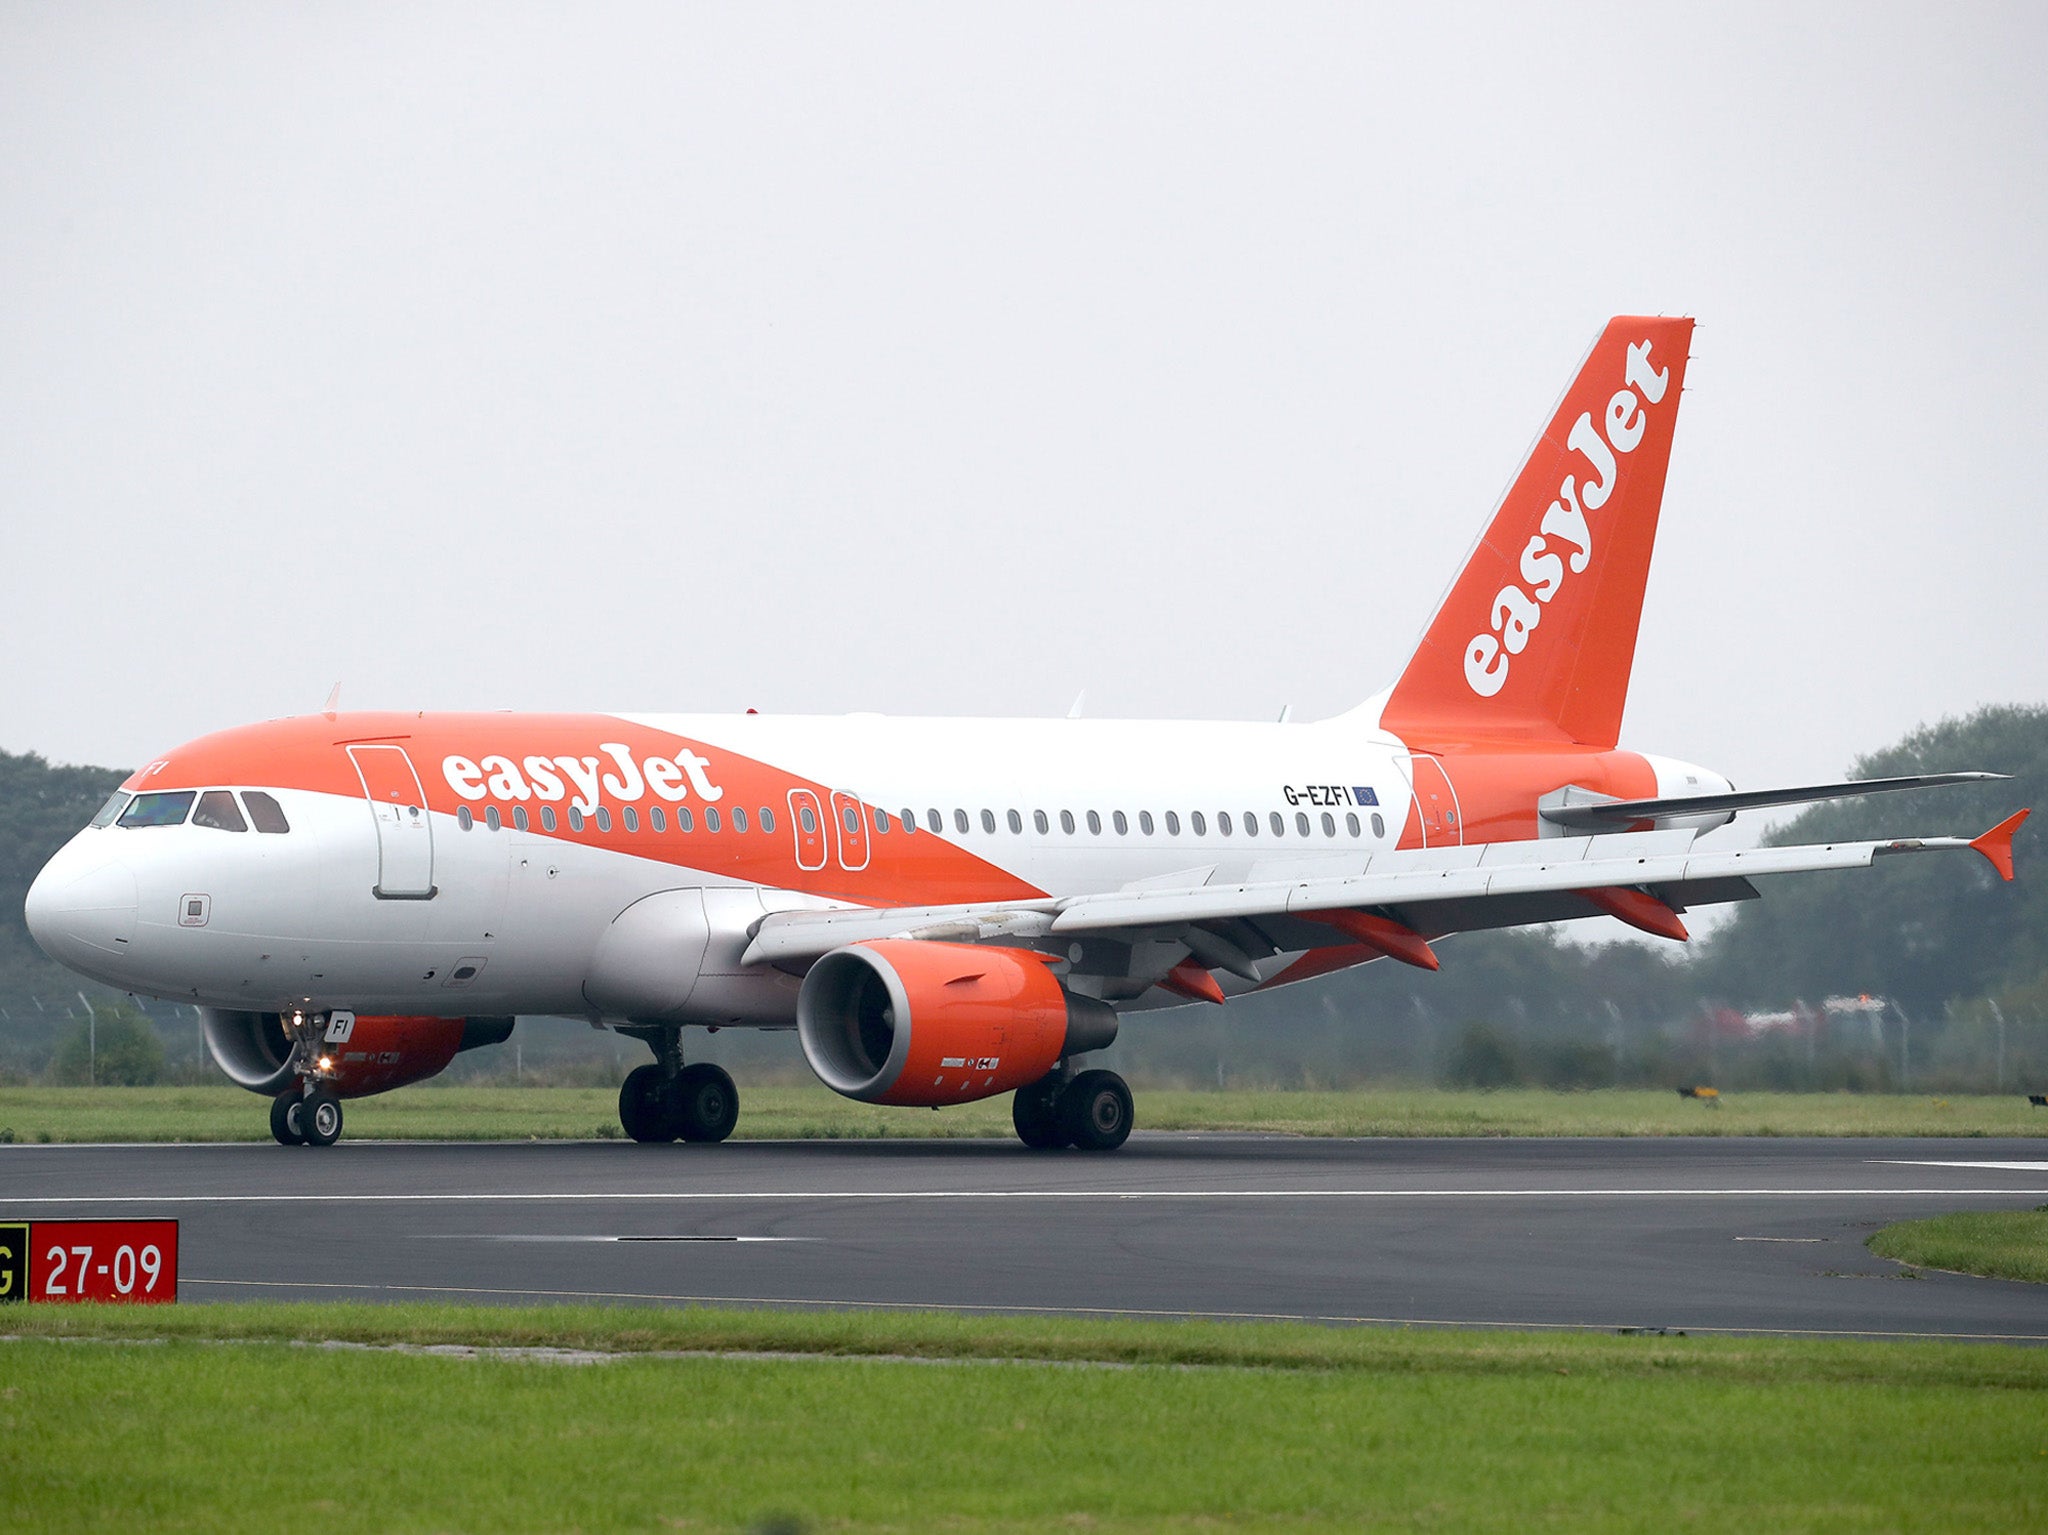 Easyjet has faced a number of disability lawsuits